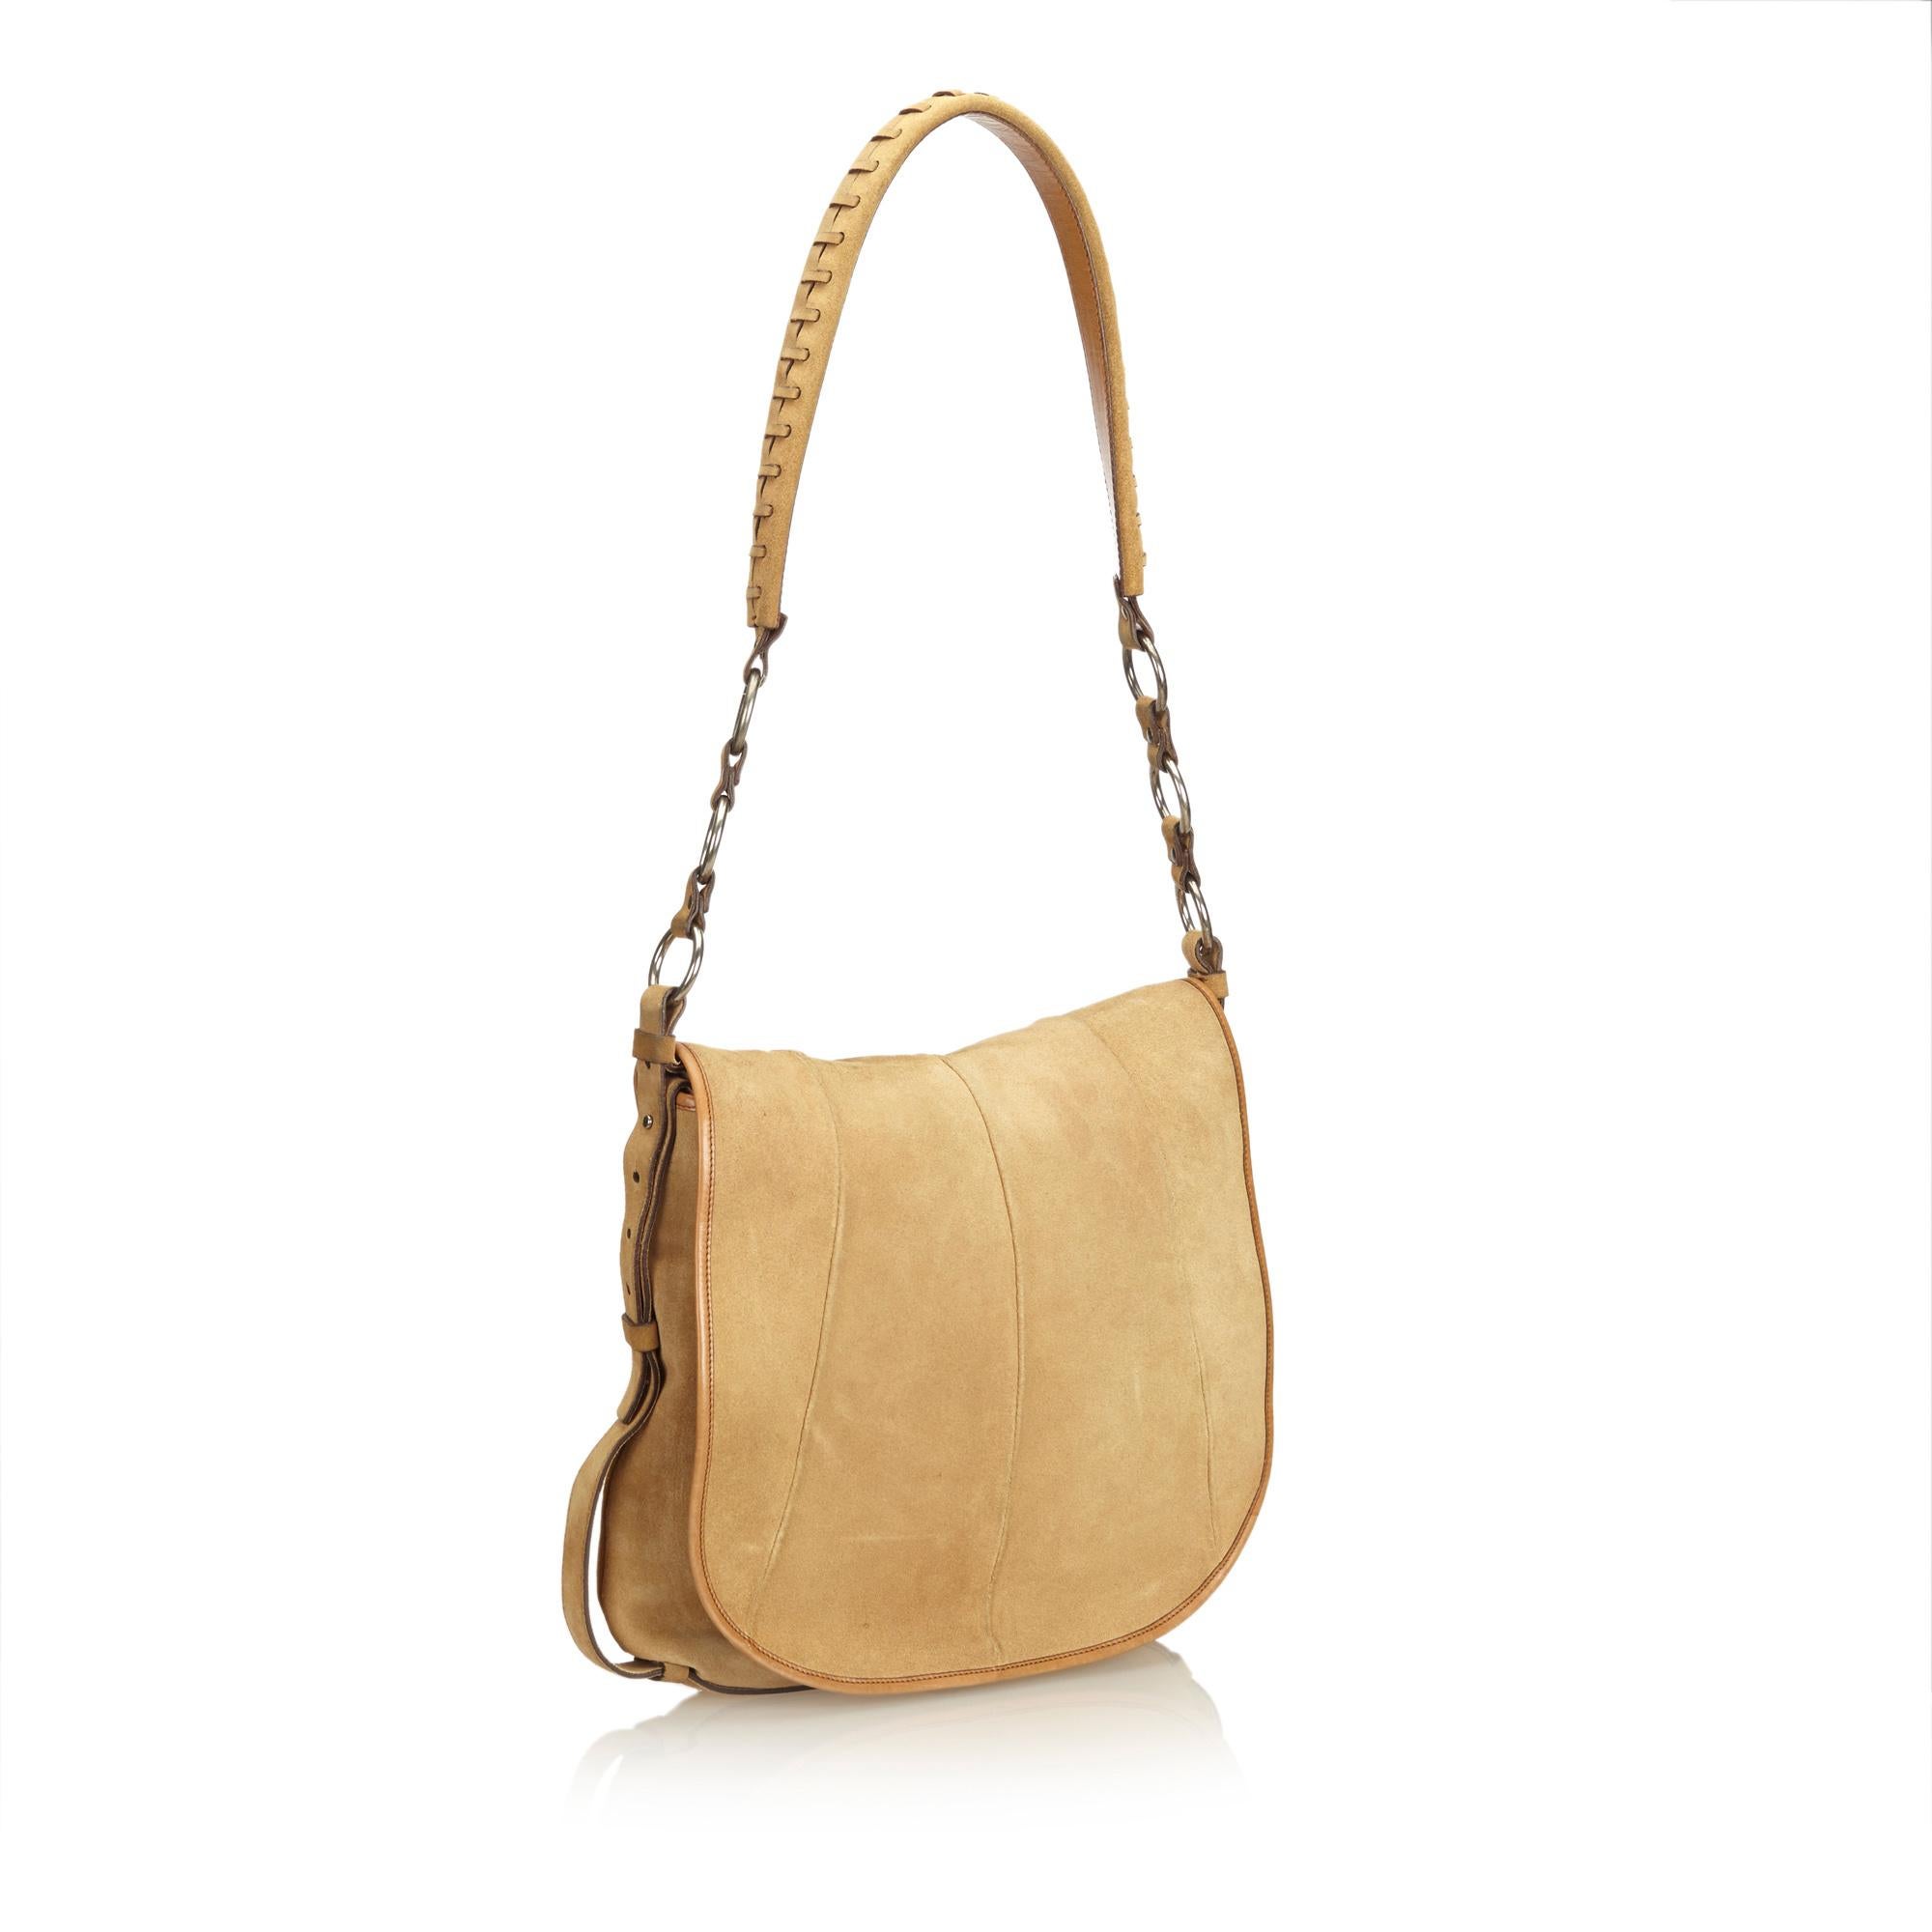 This shoulder bag features a nubuck body, braided leather strap, front flap, and interior zip and slip pockets. It carries as AB condition rating.

Inclusions: 
Dust Bag

Dimensions:
Length: 30.00 cm
Width: 32.50 cm
Depth: 5.00 cm
Shoulder Drop: